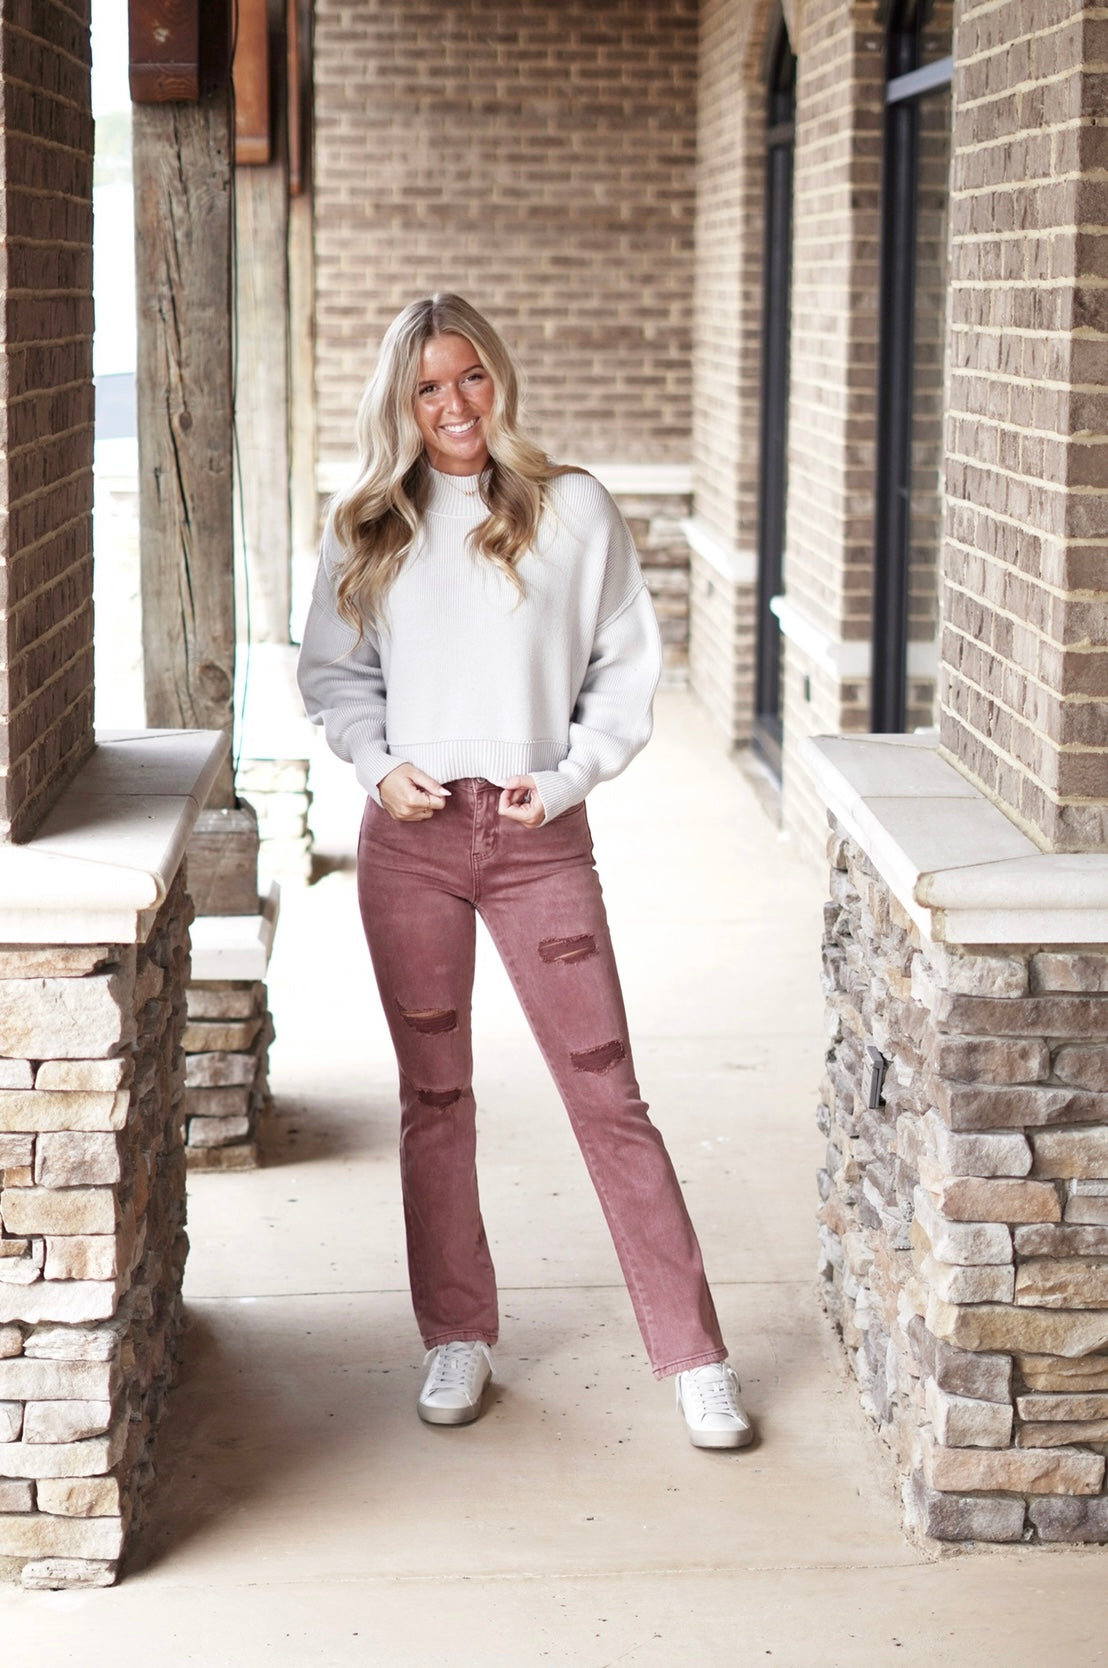 Darling Dusty Rose Cropped Straight Leg Jeans Zipper Fly Straight Leg Cropped Length Fitted Minor Distressing Dusty Rose Color 93% Cotton, 5% Polyester, 2% Spandex. Blonde model, grey sweater, sneakers. Stone and brick background.